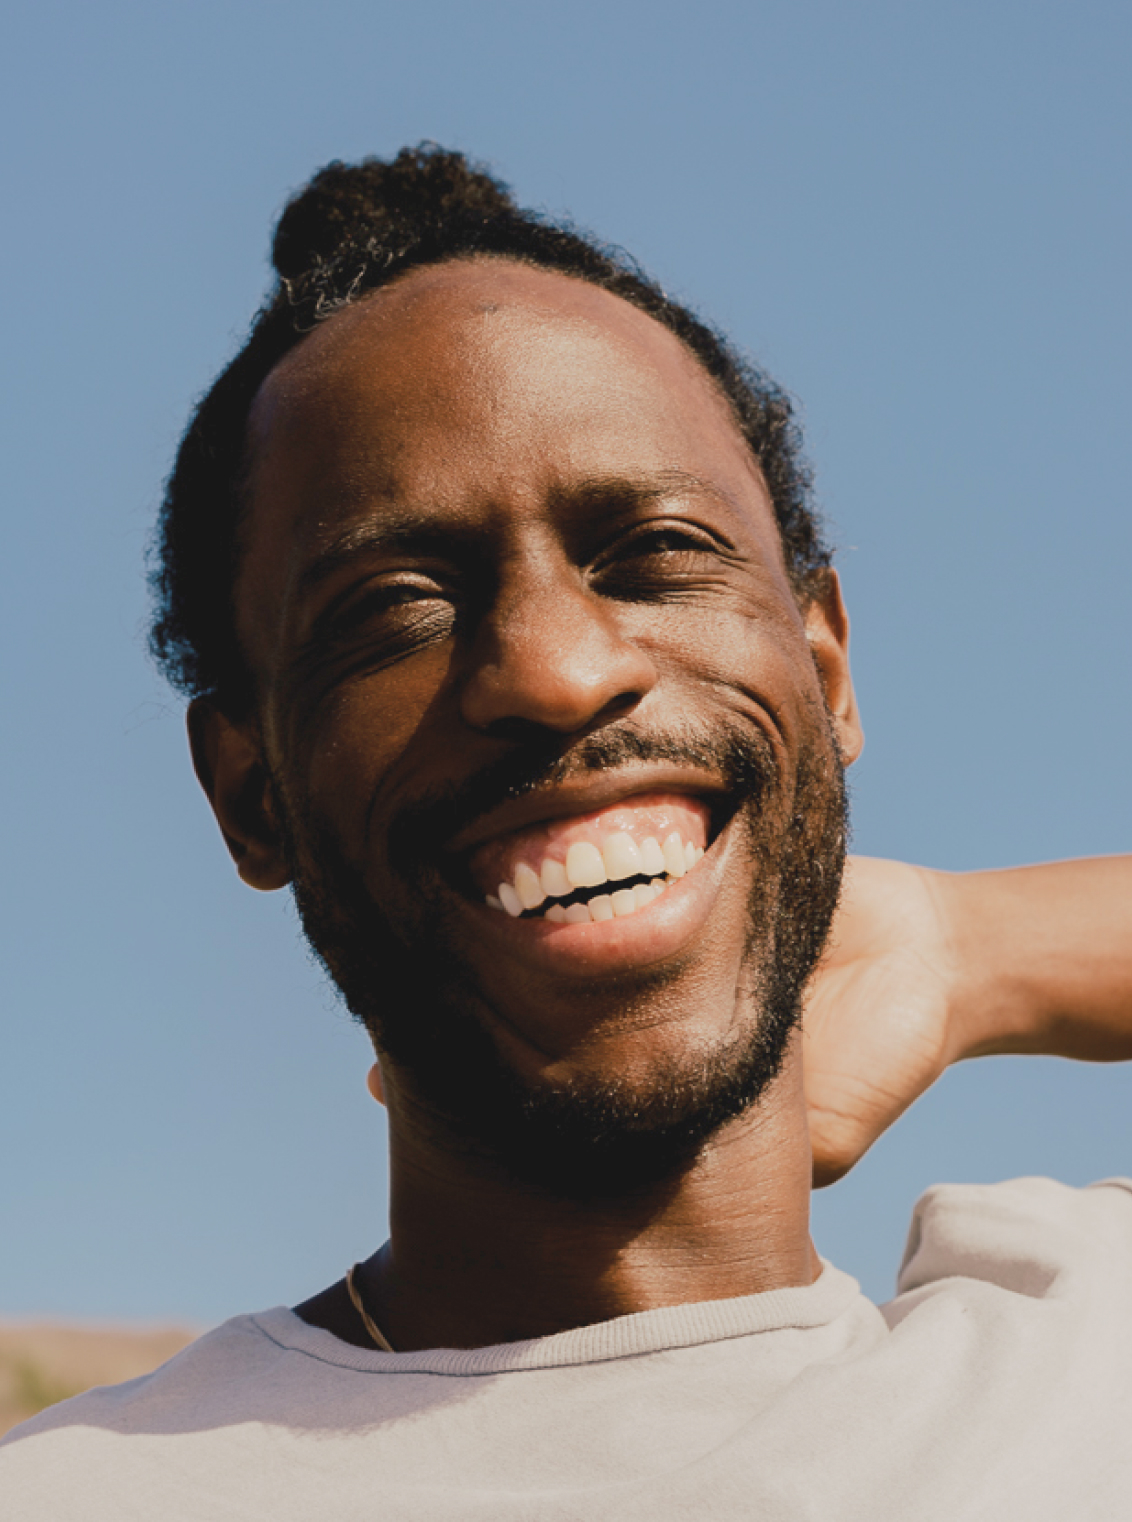 Photo of a man smiling in front of a blue sky